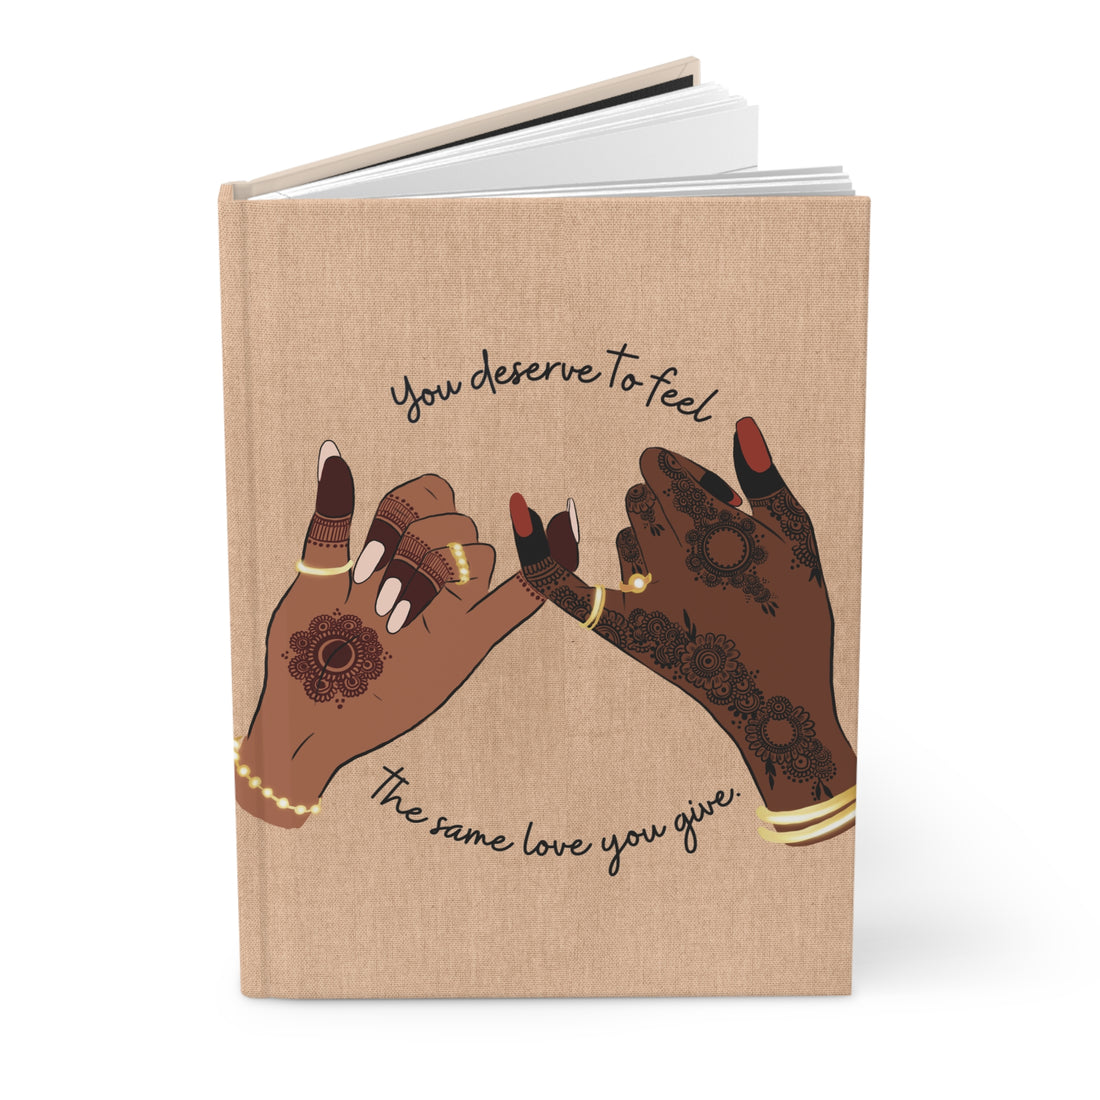 You Deserve to Feel the Same Love You Give - Hardcover Journal Matte